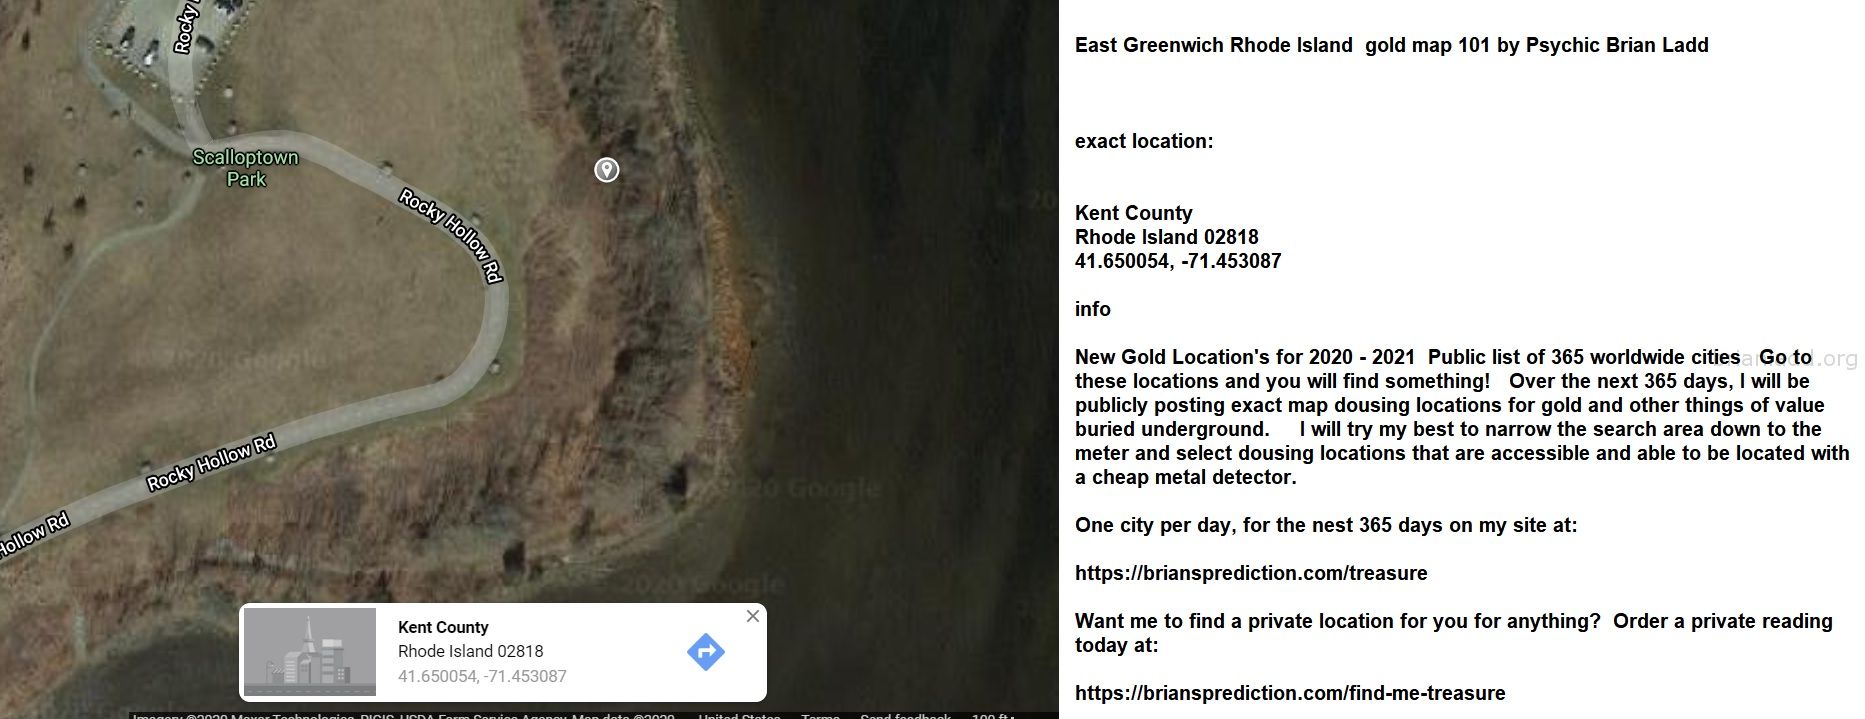 East Greenwich Rhode Island Gold Map 101 By Psychic Brian Ladd - East Greenwich Rhode Island  Gold Map 101 By Psychic Br...
East Greenwich Rhode Island  Gold Map 101 By Psychic Brian Ladd  Exact Location:  Kent County  Rhode Island 02818  41.650054, -71.453087  Info  New Gold Location'S For 2020 - 2021  Public List Of 365 Worldwide Cities  Go To These Locations And You Will Find Something!  Over The Next 365 Days, I Will Be Publicly Posting Exact Map Dousing Locations For Gold And Other Things Of Value Buried Underground.  I Will Try My Best To Narrow The Search Area Down To The Meter And Select Dousing Locations That Are Accessible And Able To Be Located With A Cheap Metal Detector.  One City Per Day, For The Nest 365 Days On My Site At:   https://briansprediction.com/Treasure  Want Me To Find A Private Location For You For Anything?  Order A Private Reading Today At:   https://briansprediction.com/Find-Me-Treasure
